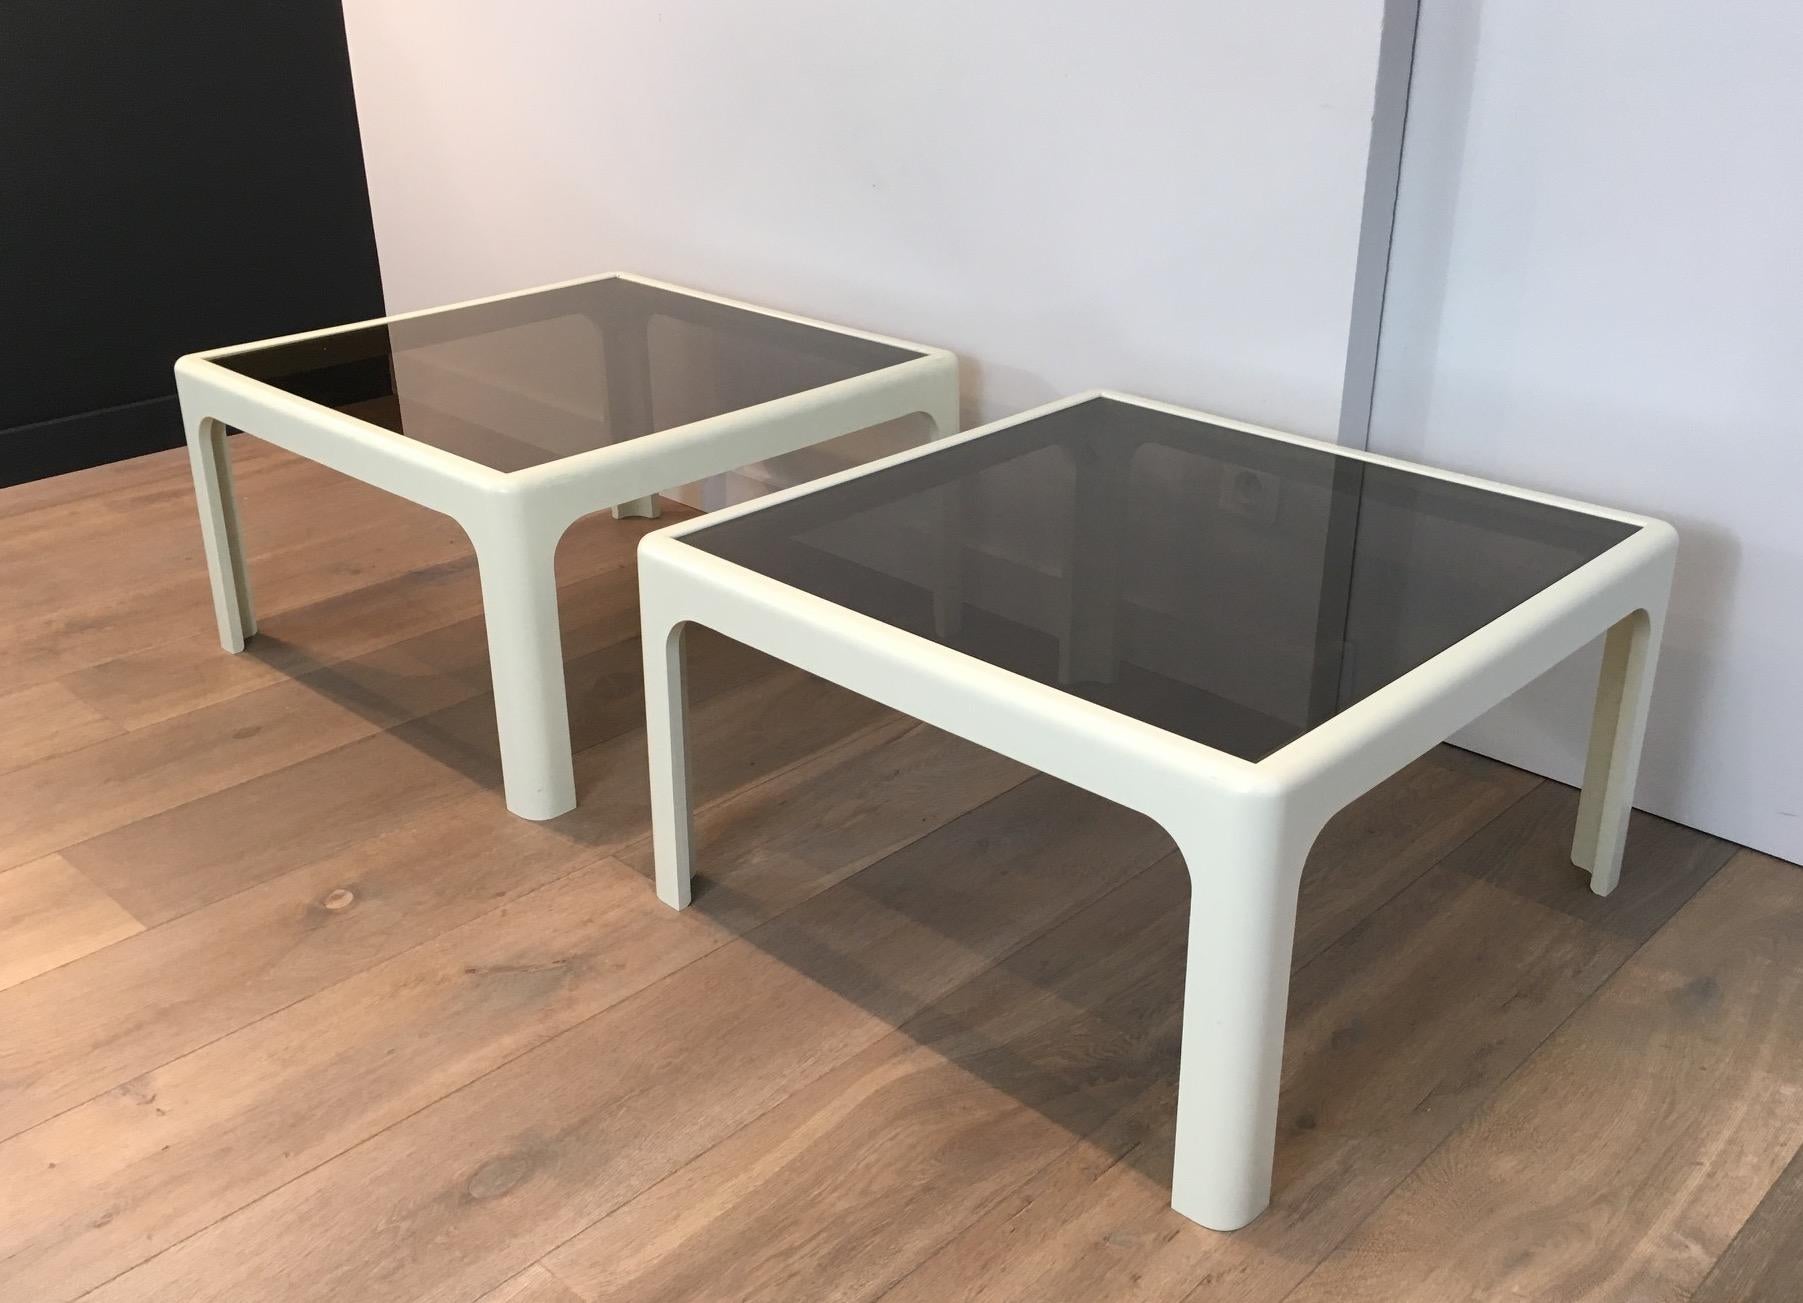 This pair of decorative large side tables is made of a white fiberglass with a bronze glass shelf on top. These side tables are German, by Poschinger pur-möbel, which label stayed on one of the table. They are circa 1970.